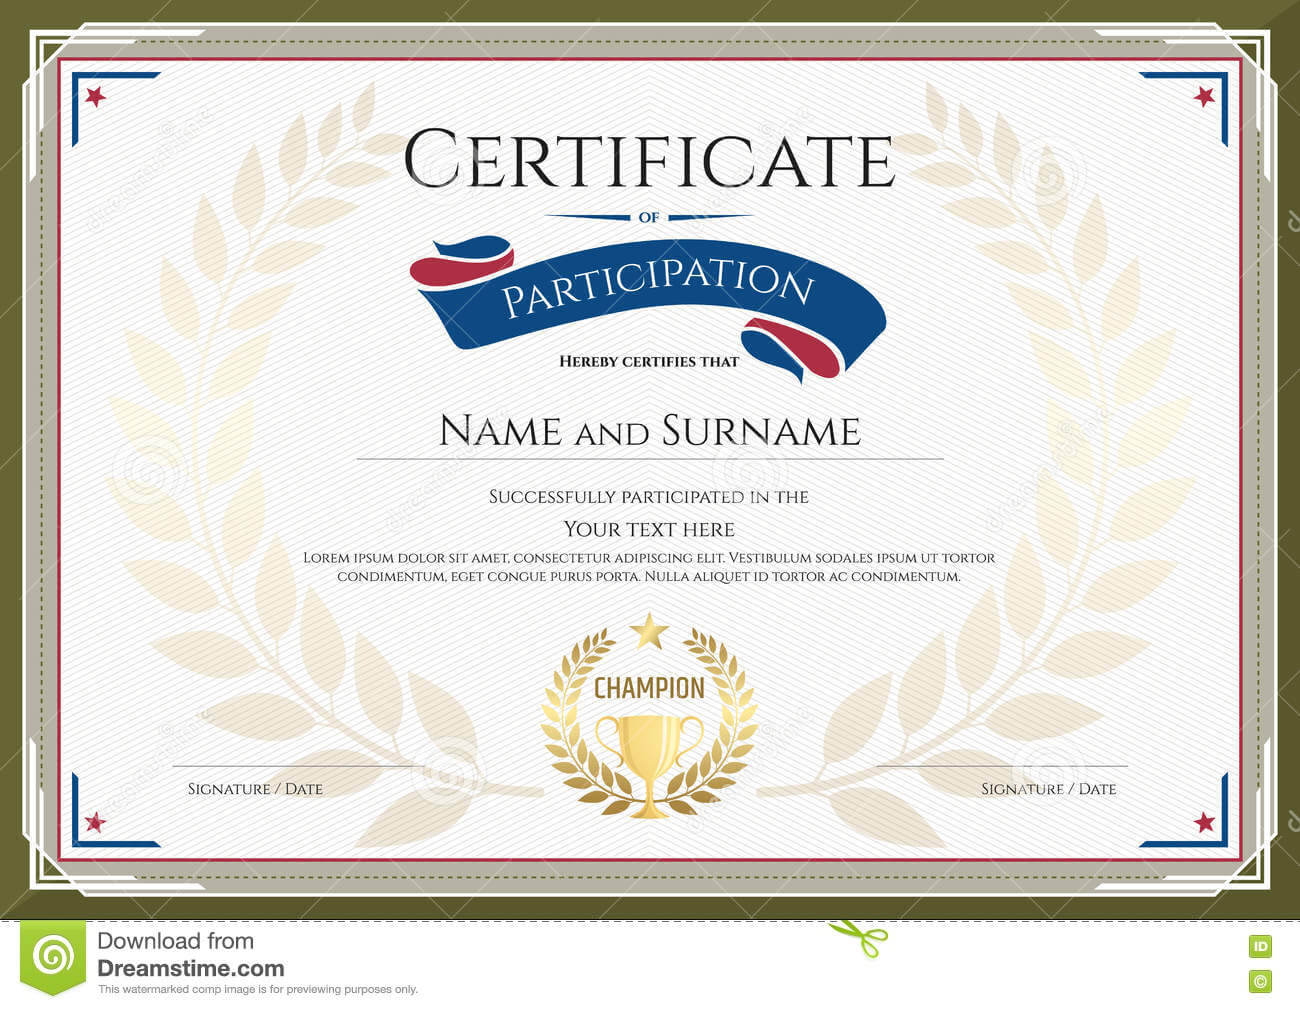 Certificate Of Participation Template With Green Broder Intended For Certification Of Participation Free Template